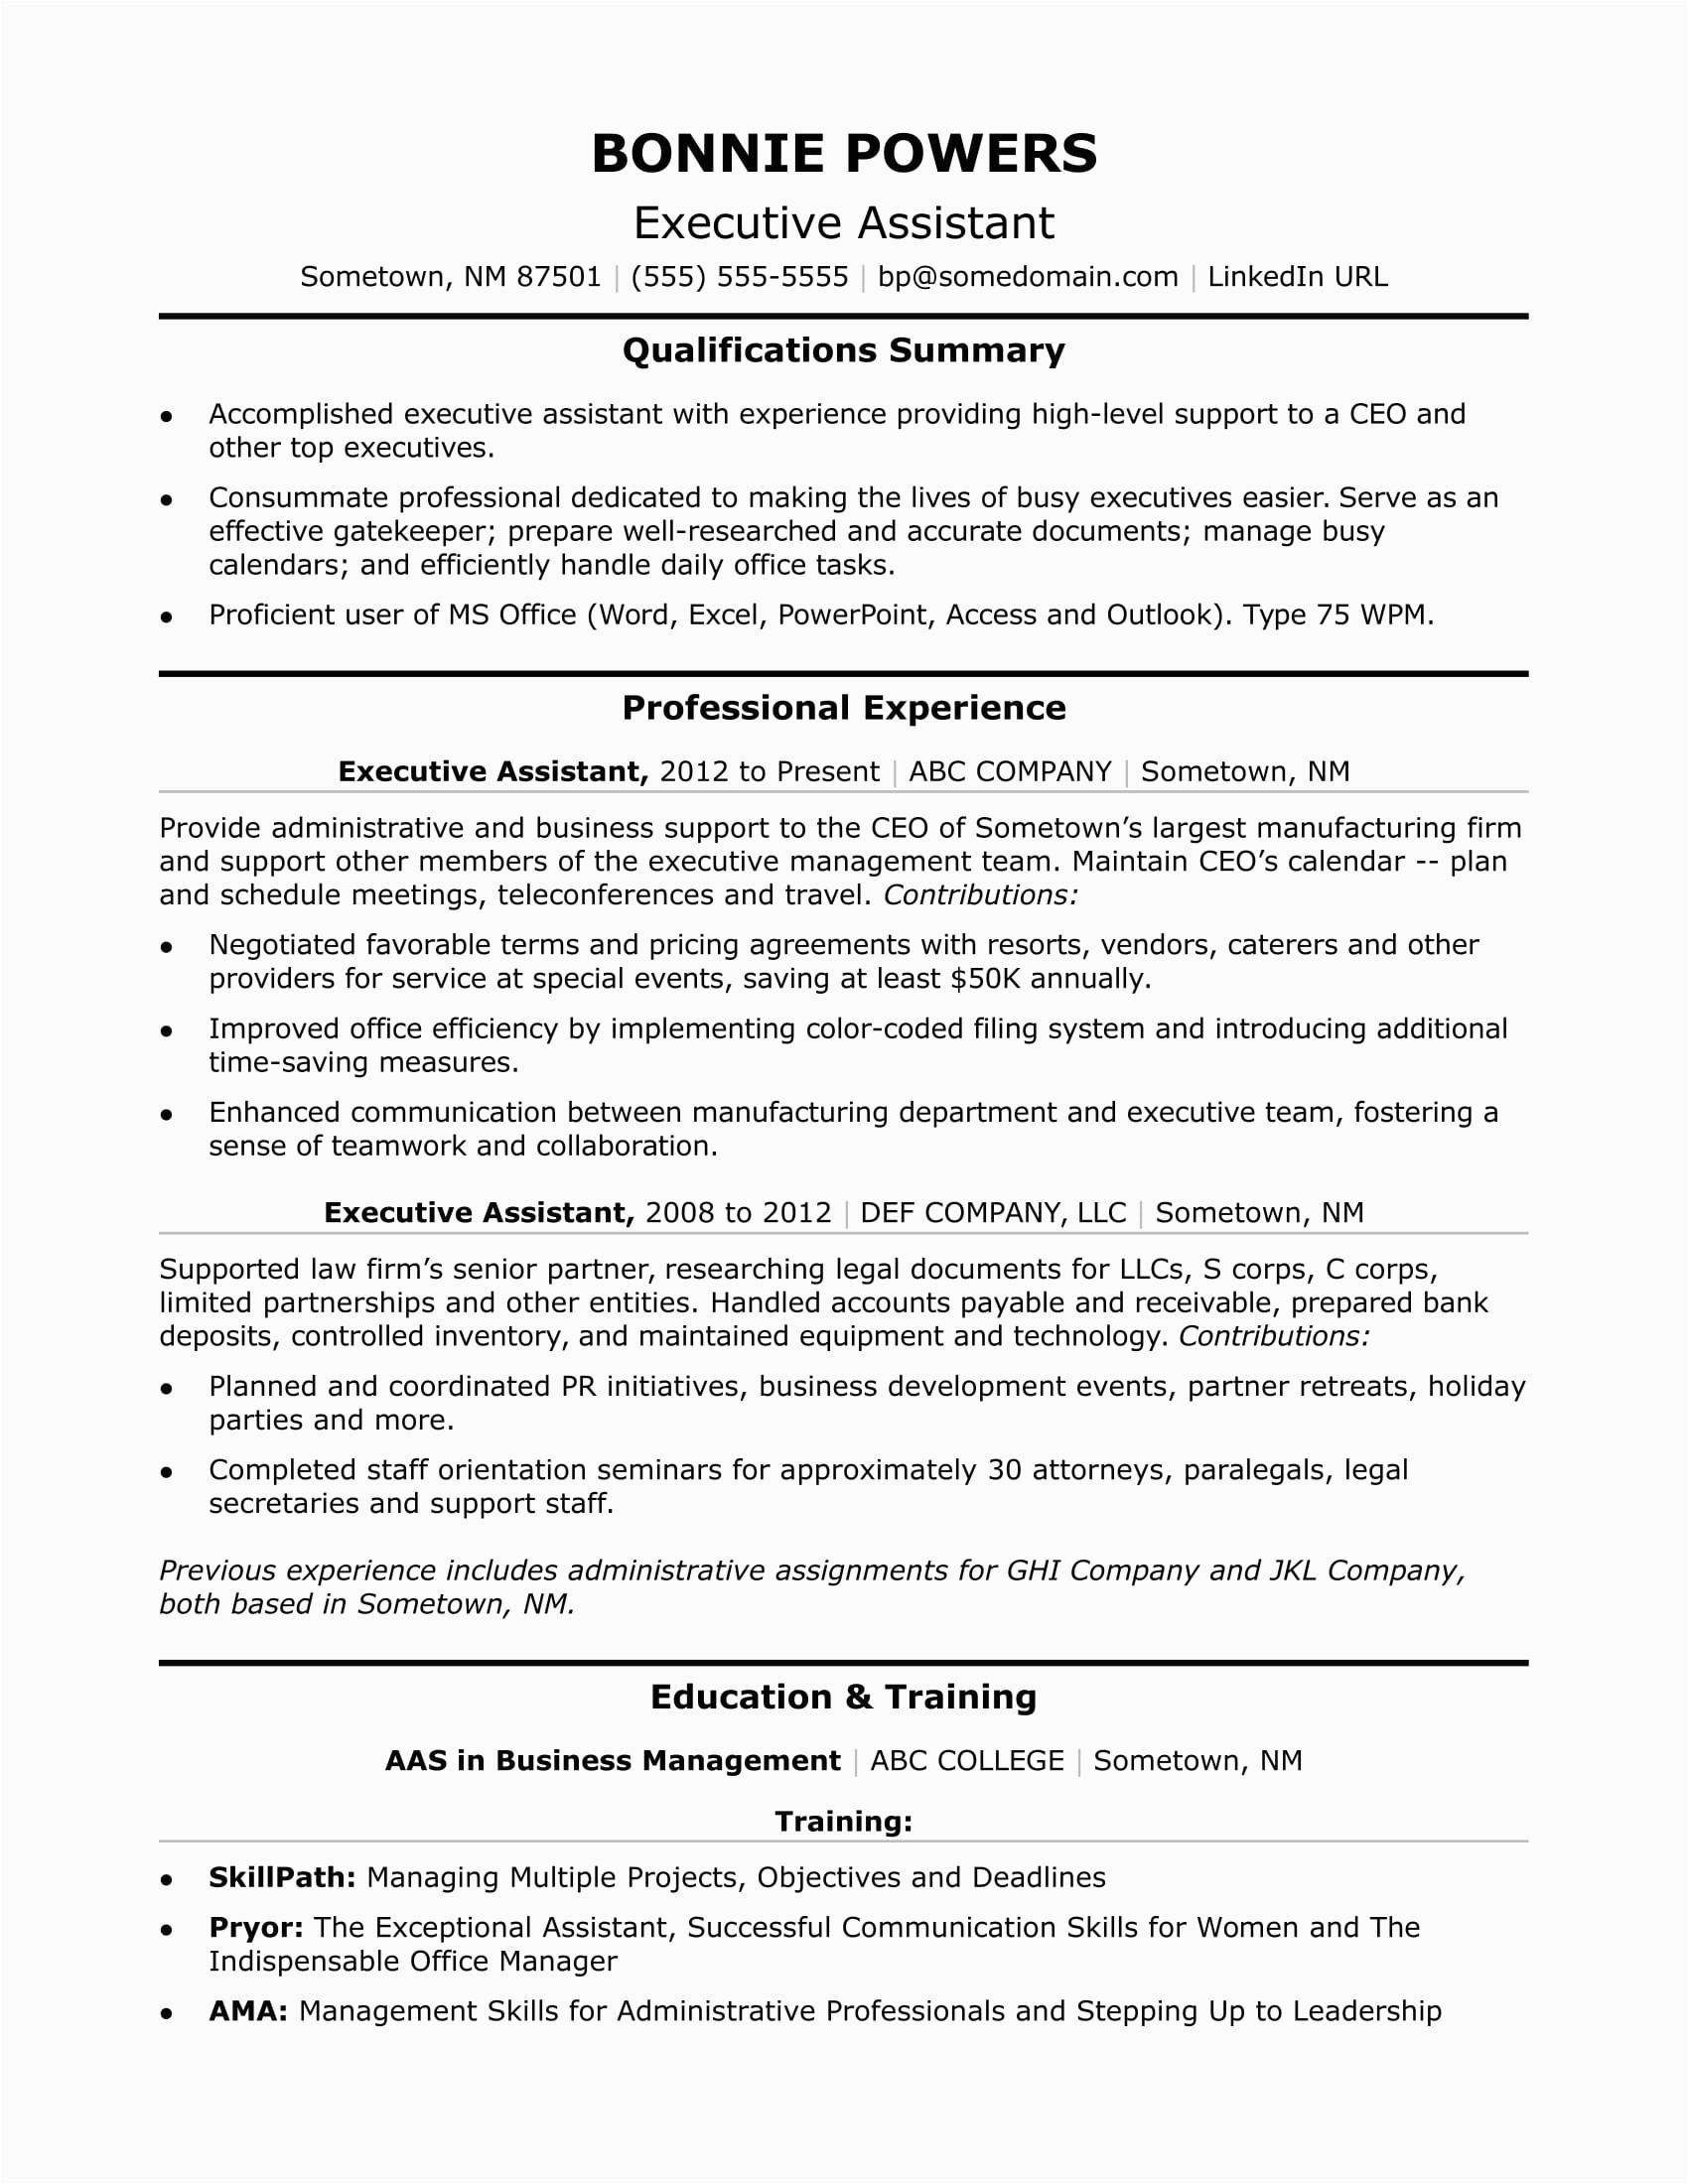 High Level Executive assistant Resume Sample Executive assistant Resume